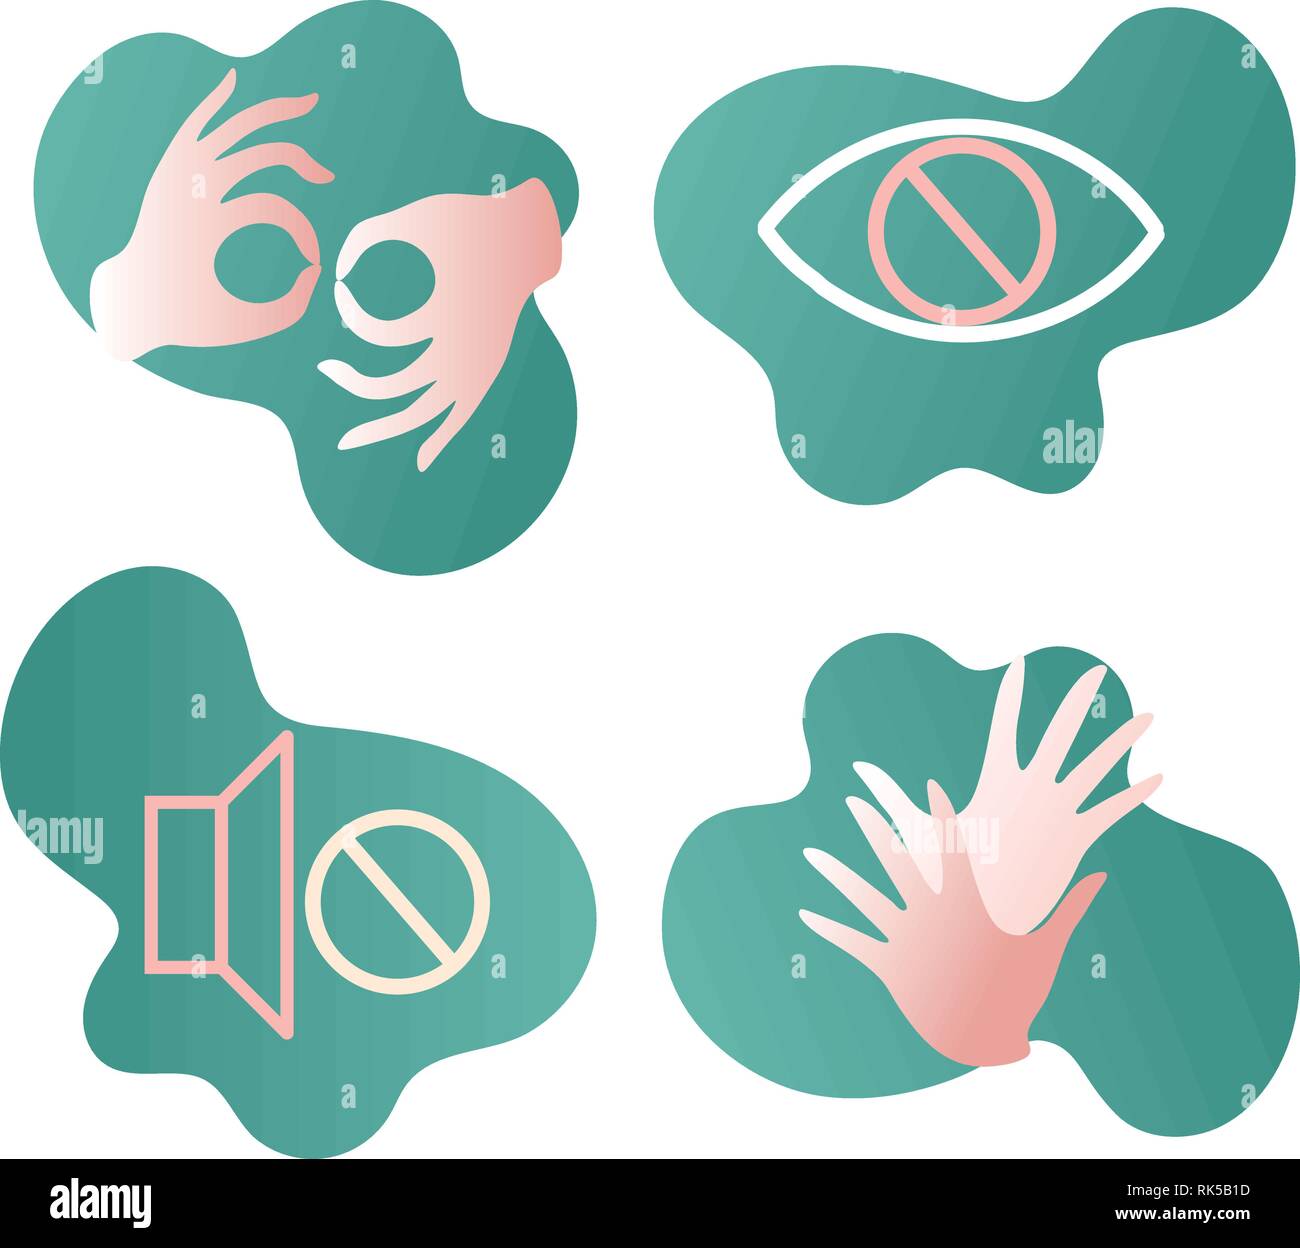 Sign language,blind, deaf, disabled icon, Web, Accessibility, Application Icons, vector set Stock Vector